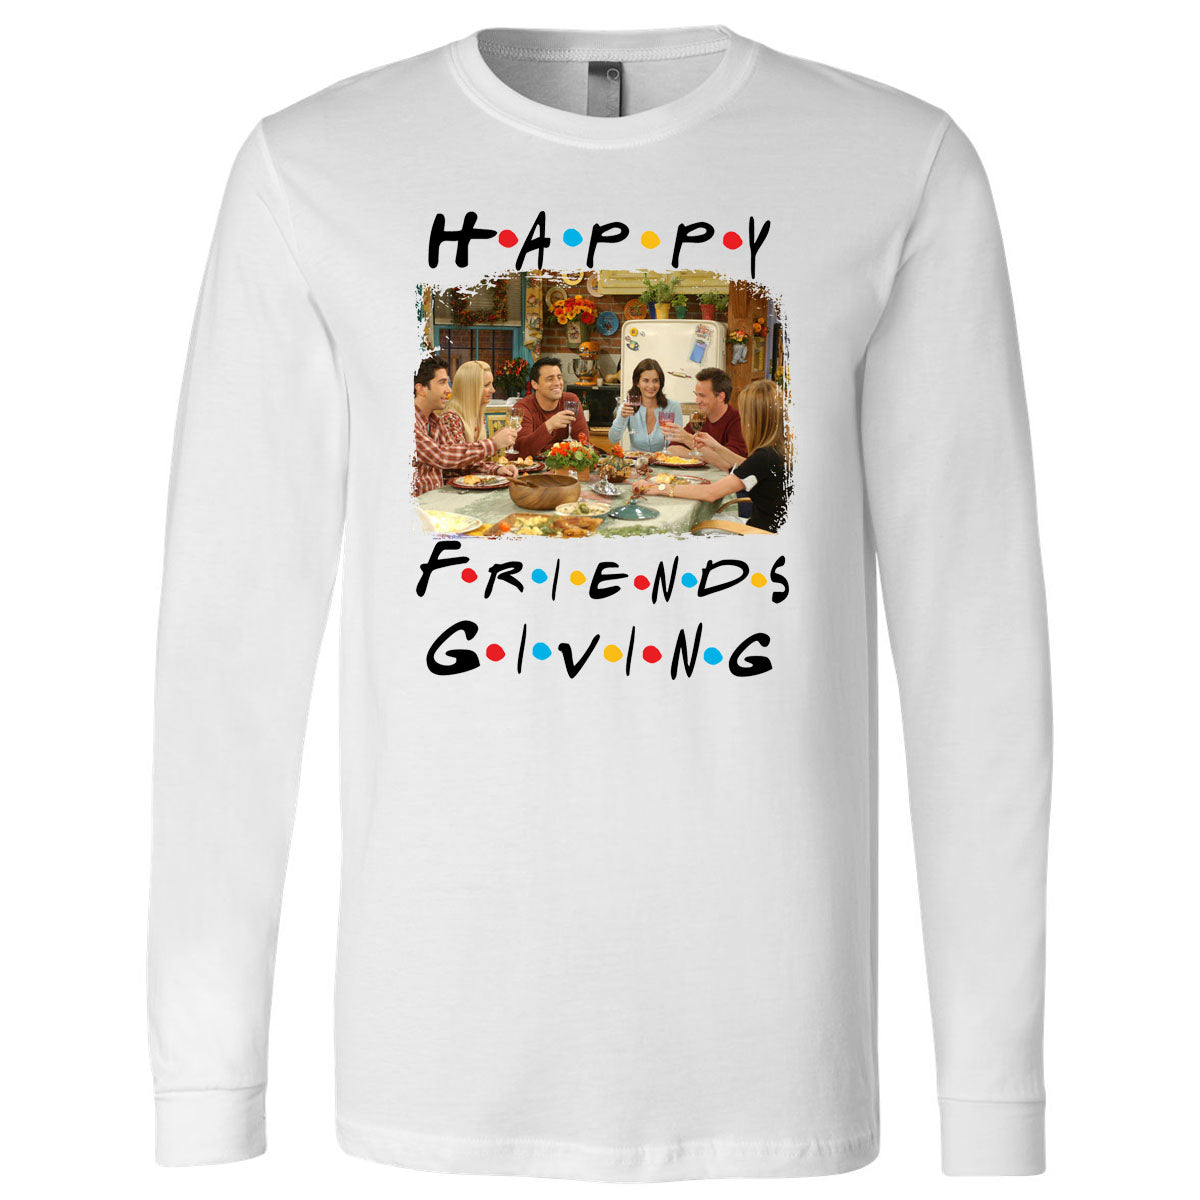 Happy FriendsGiving - White Tee - Southern Grace Creations